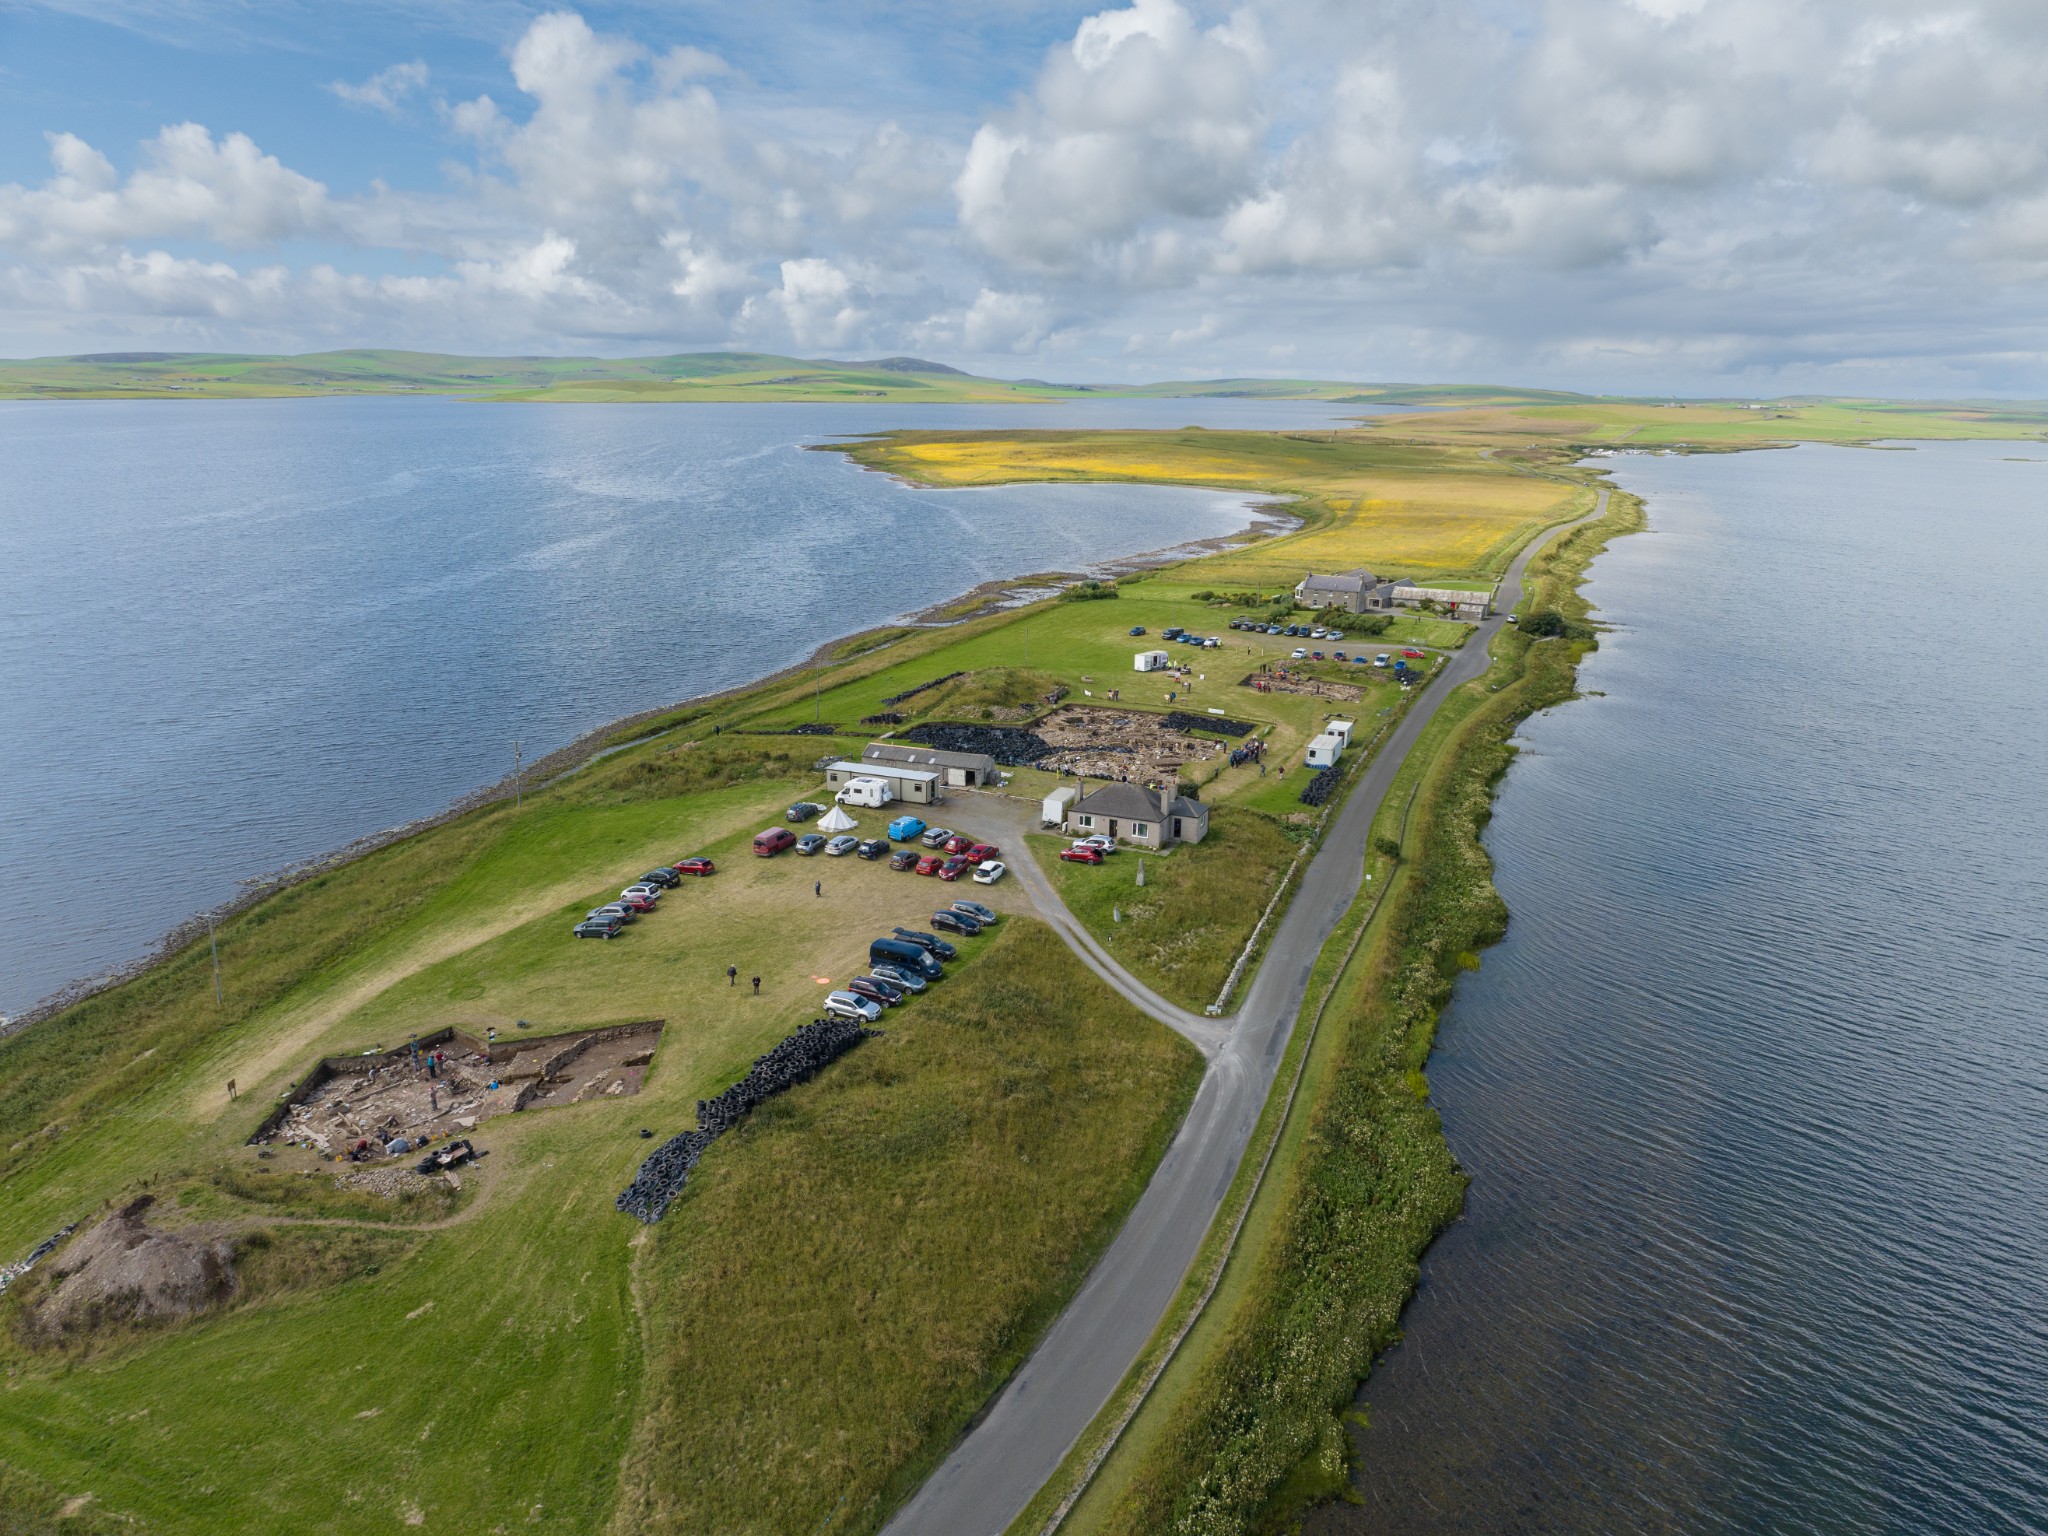 Aerial view of the Ness of Brodgar, Orkney - image by Scott Pike